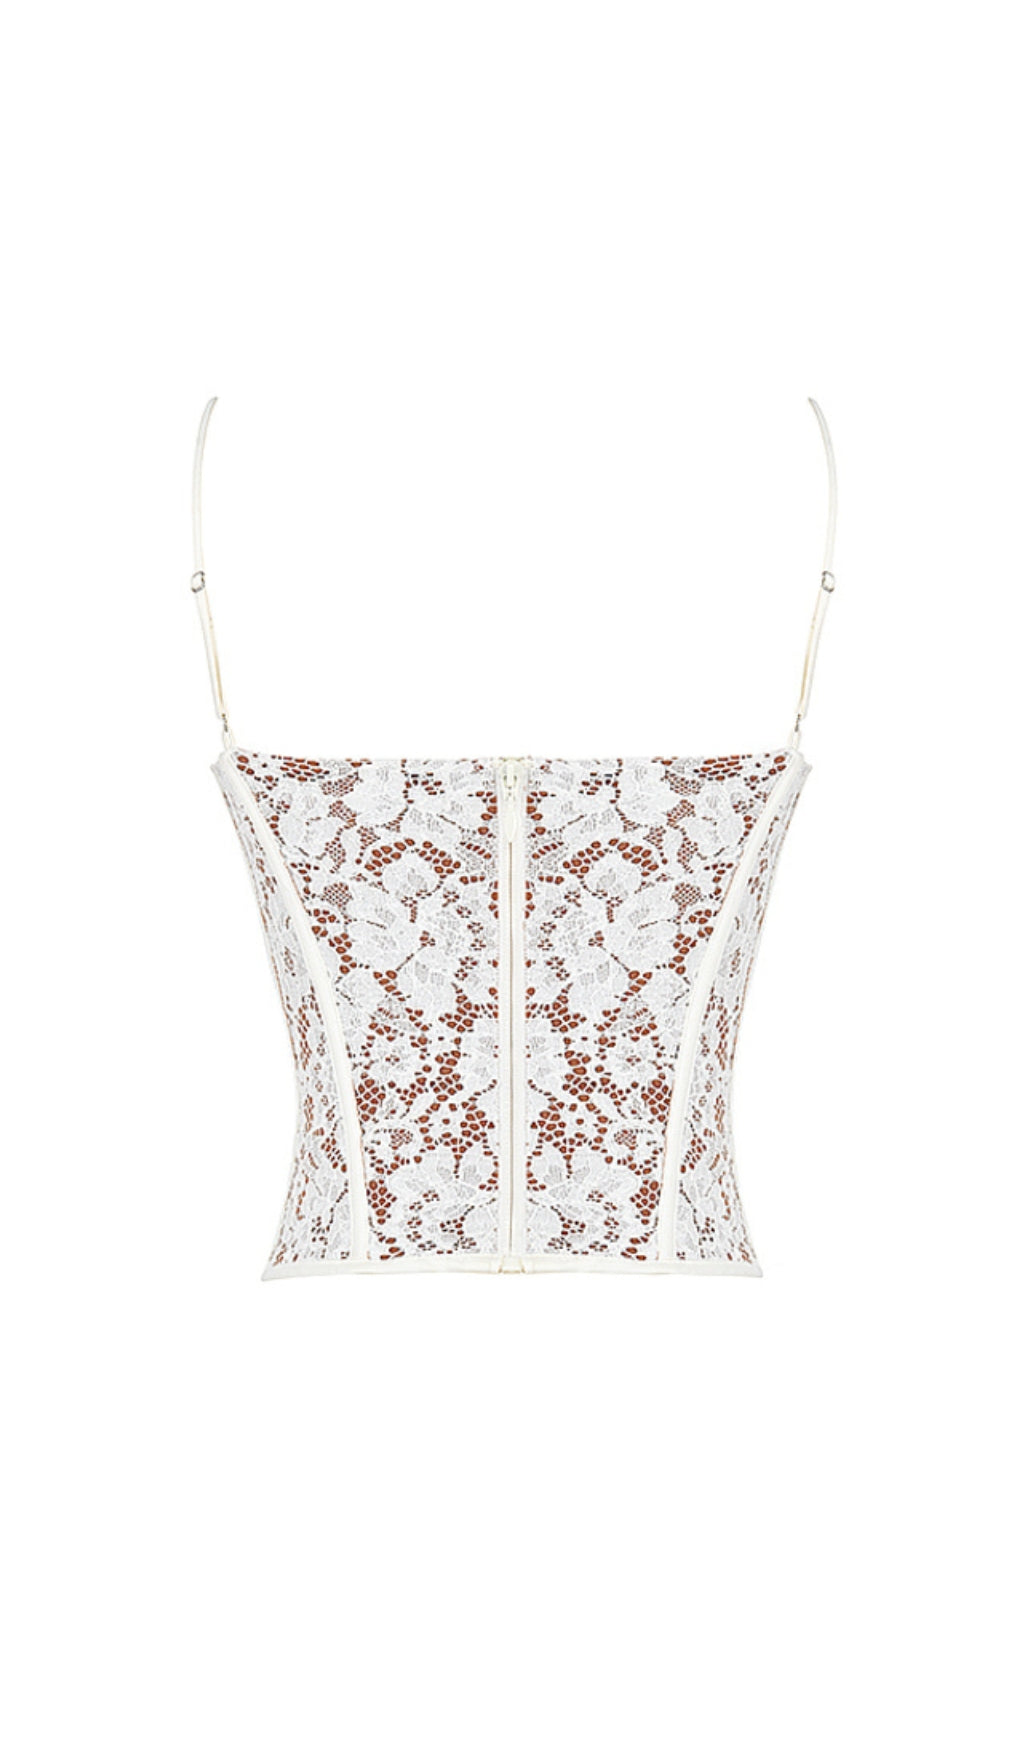 MILA Ivory Lace Underwired Corset Top